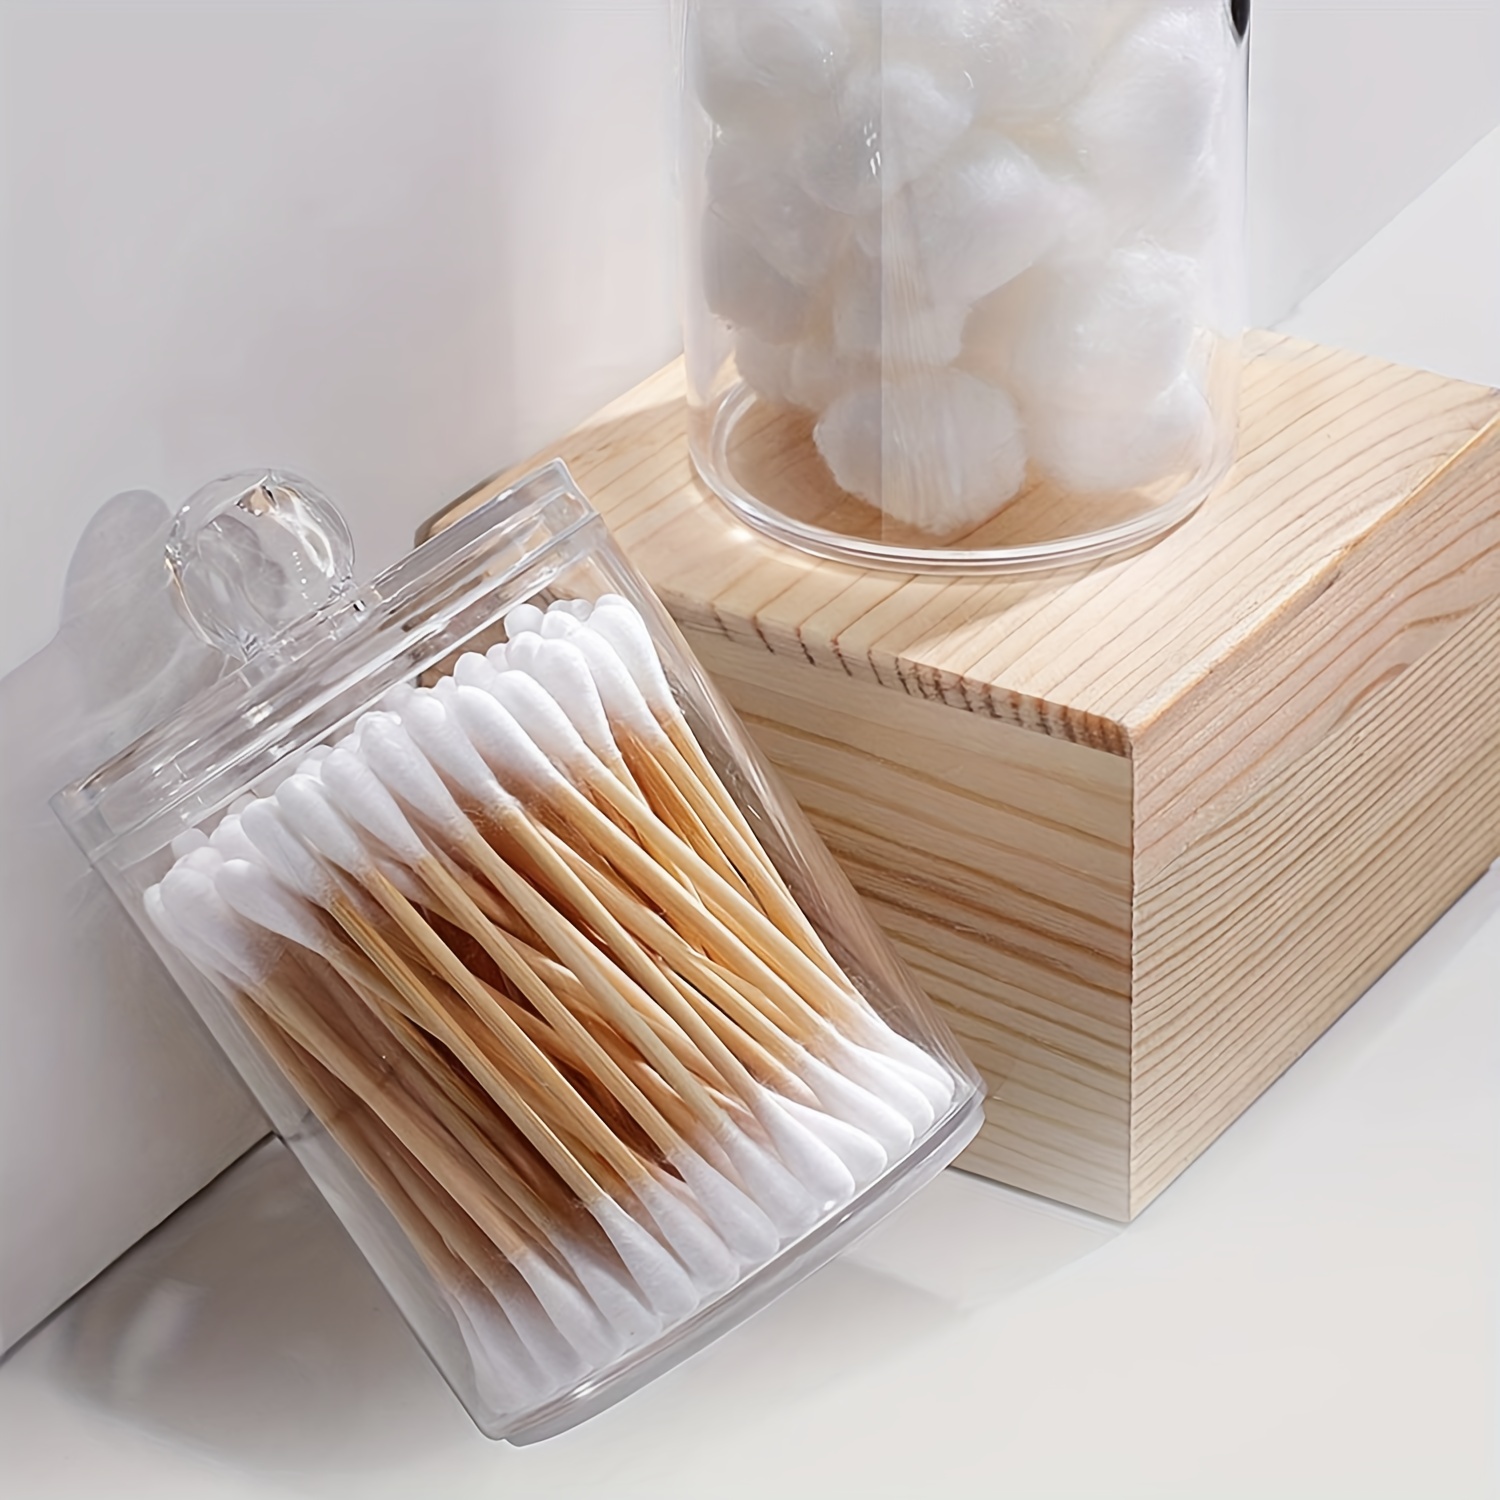 4 Pack Qtip Holder Dispenser for Cotton Ball, Cotton Swab, Cotton Round  Pads, Floss - 10 oz Clear Plastic Apothecary Organization, Vanity Makeup  Organizer 